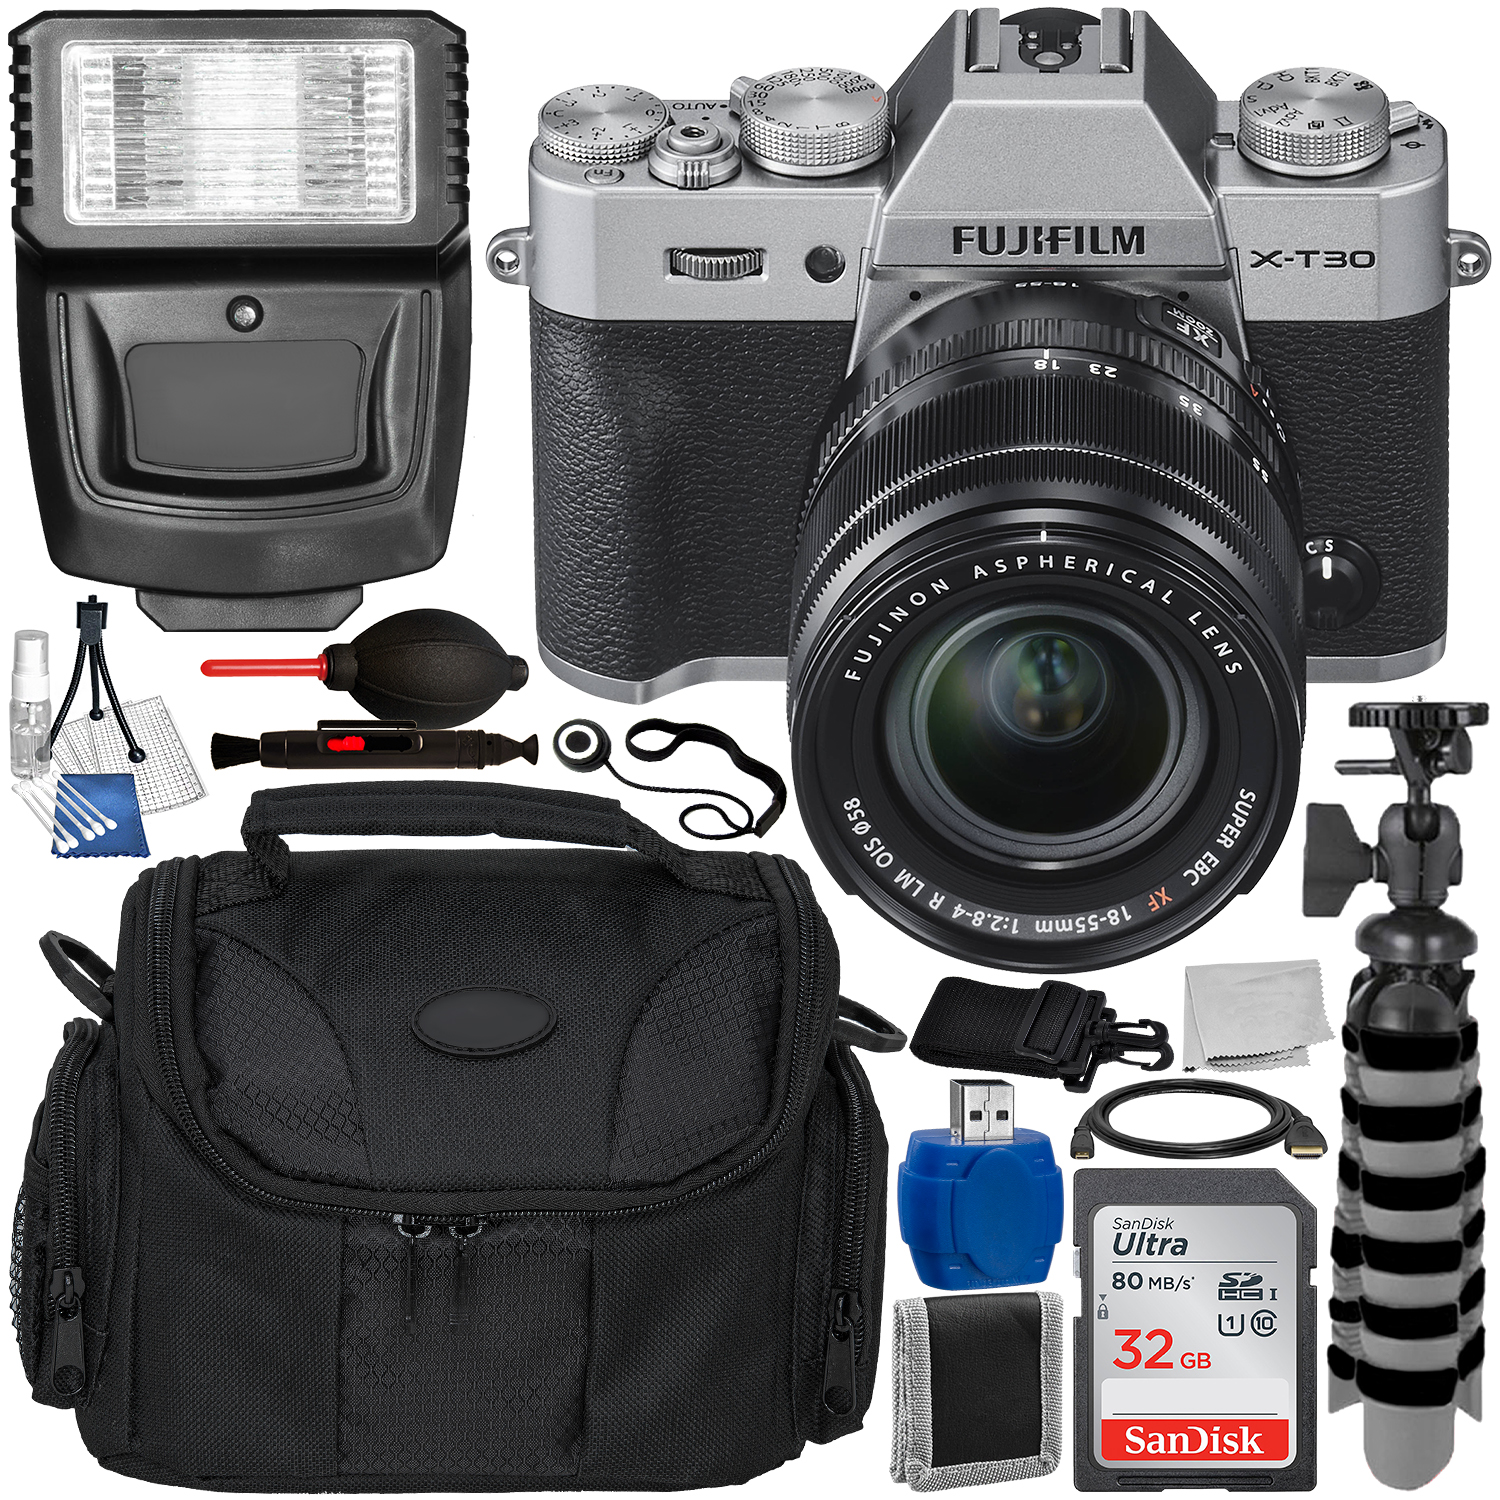 FUJIFILM X-T30 Mirrorless Digital Camera with 18-55mm Lens (Silver) and Accessory Bundle